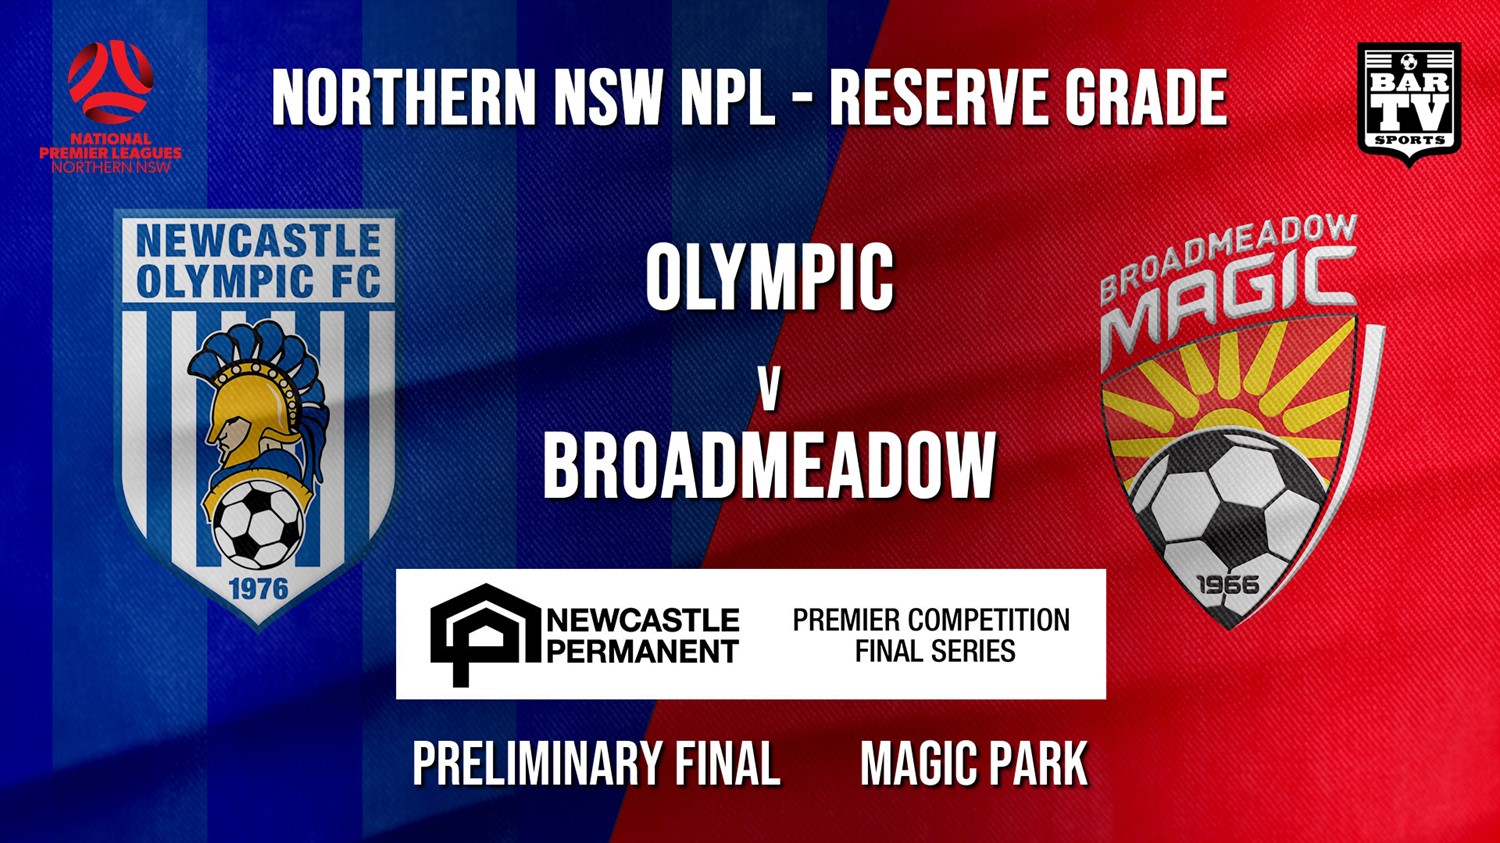 NPL NNSW RES Preliminary Final - Newcastle Olympic (Res) v Broadmeadow Magic (Res) Minigame Slate Image